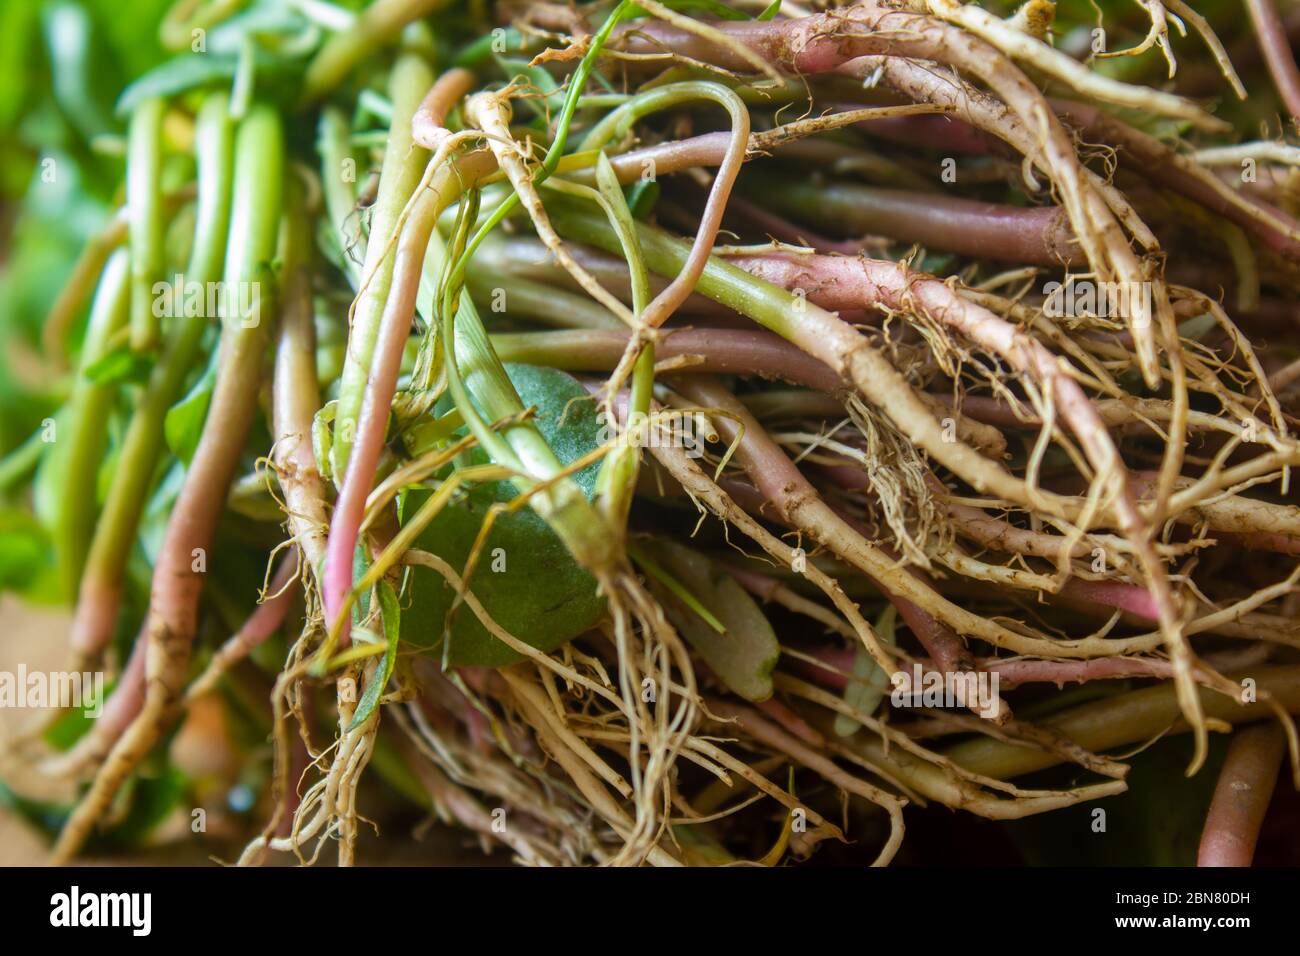 Roots of green leaves of Chinese spinach (also known as Amaranthus dubius). Known Arai keerai in tamil language. Stock Photo